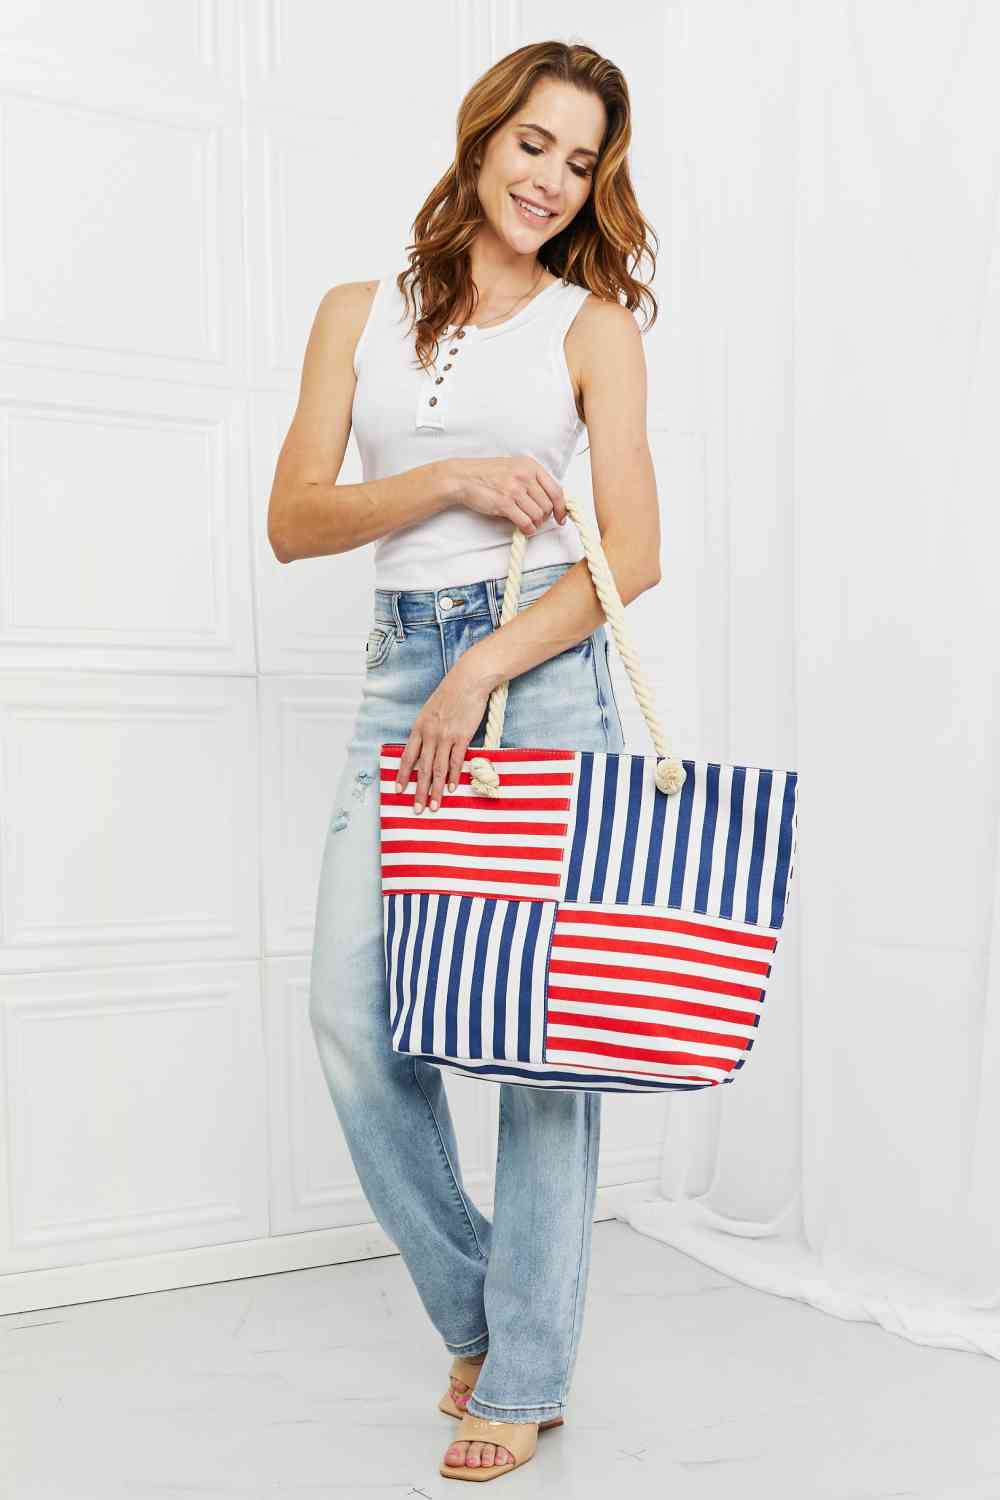 Justin Taylor I'm All In Tote Bag - Cheeky Chic Boutique